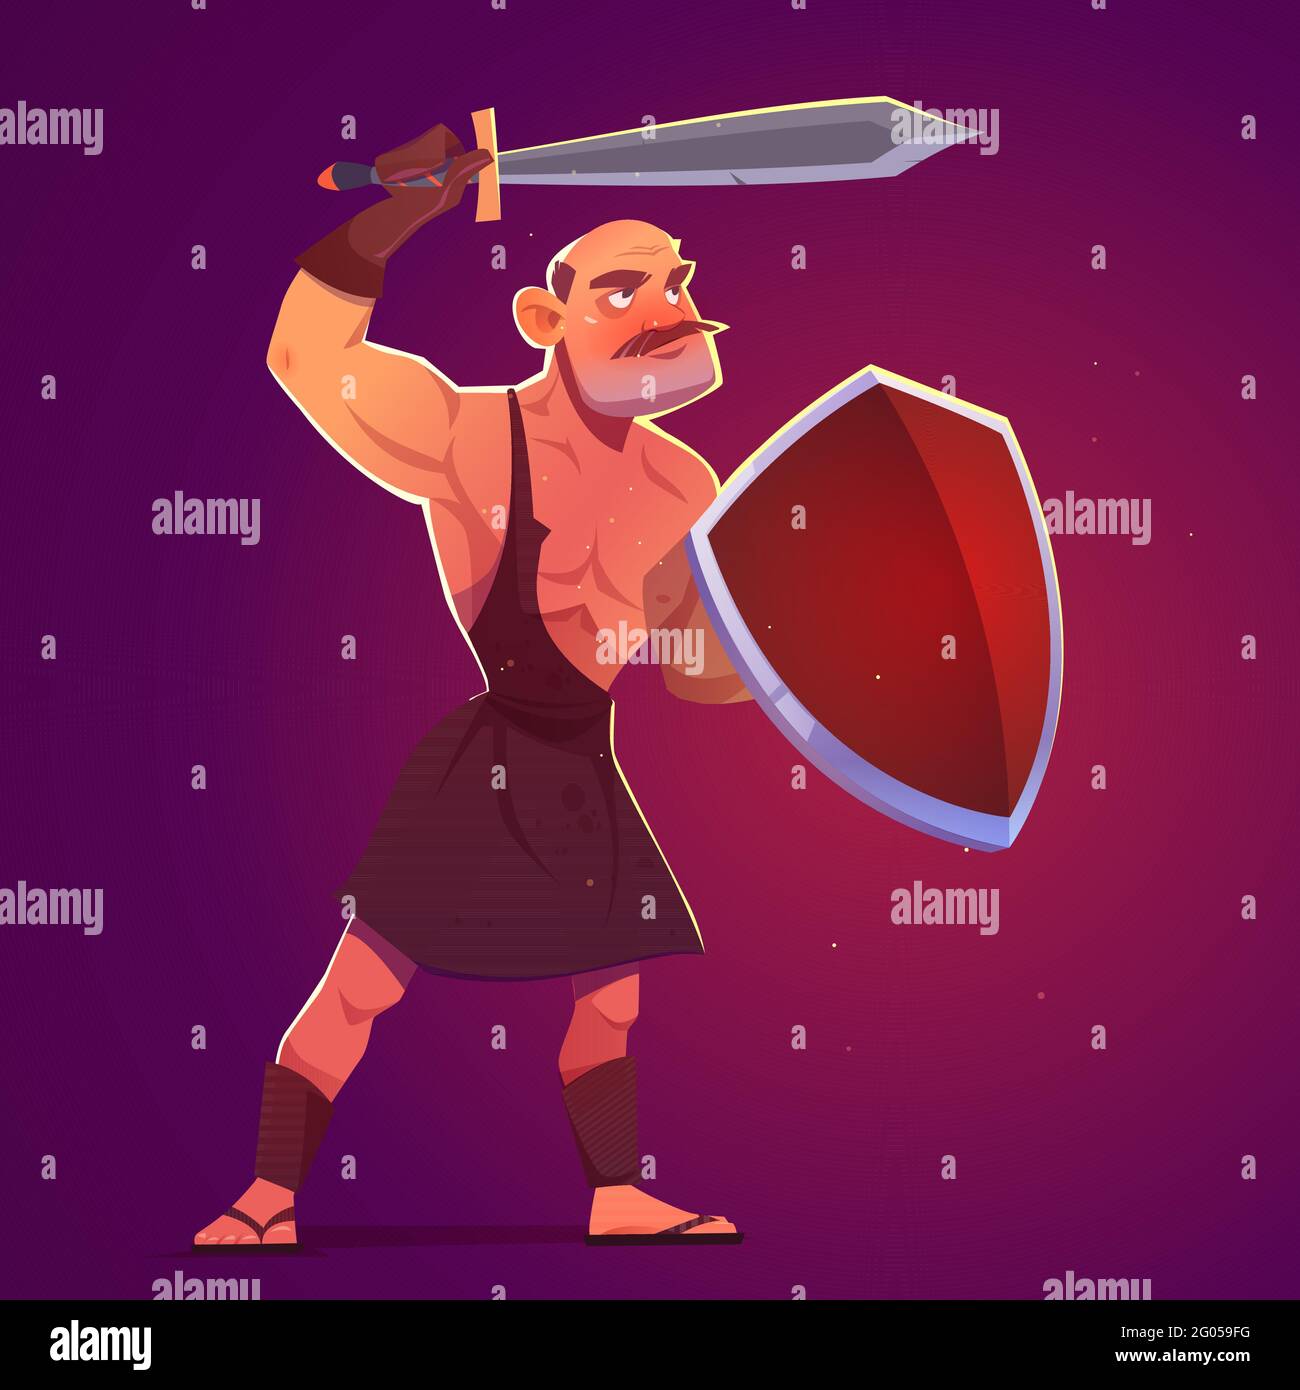 Ancient greek, spartan or roman warrior, gladiator with sword and shield. Vector cartoon illustration of antique brave man, trojan or barbarian soldier from history or mythology Stock Vector